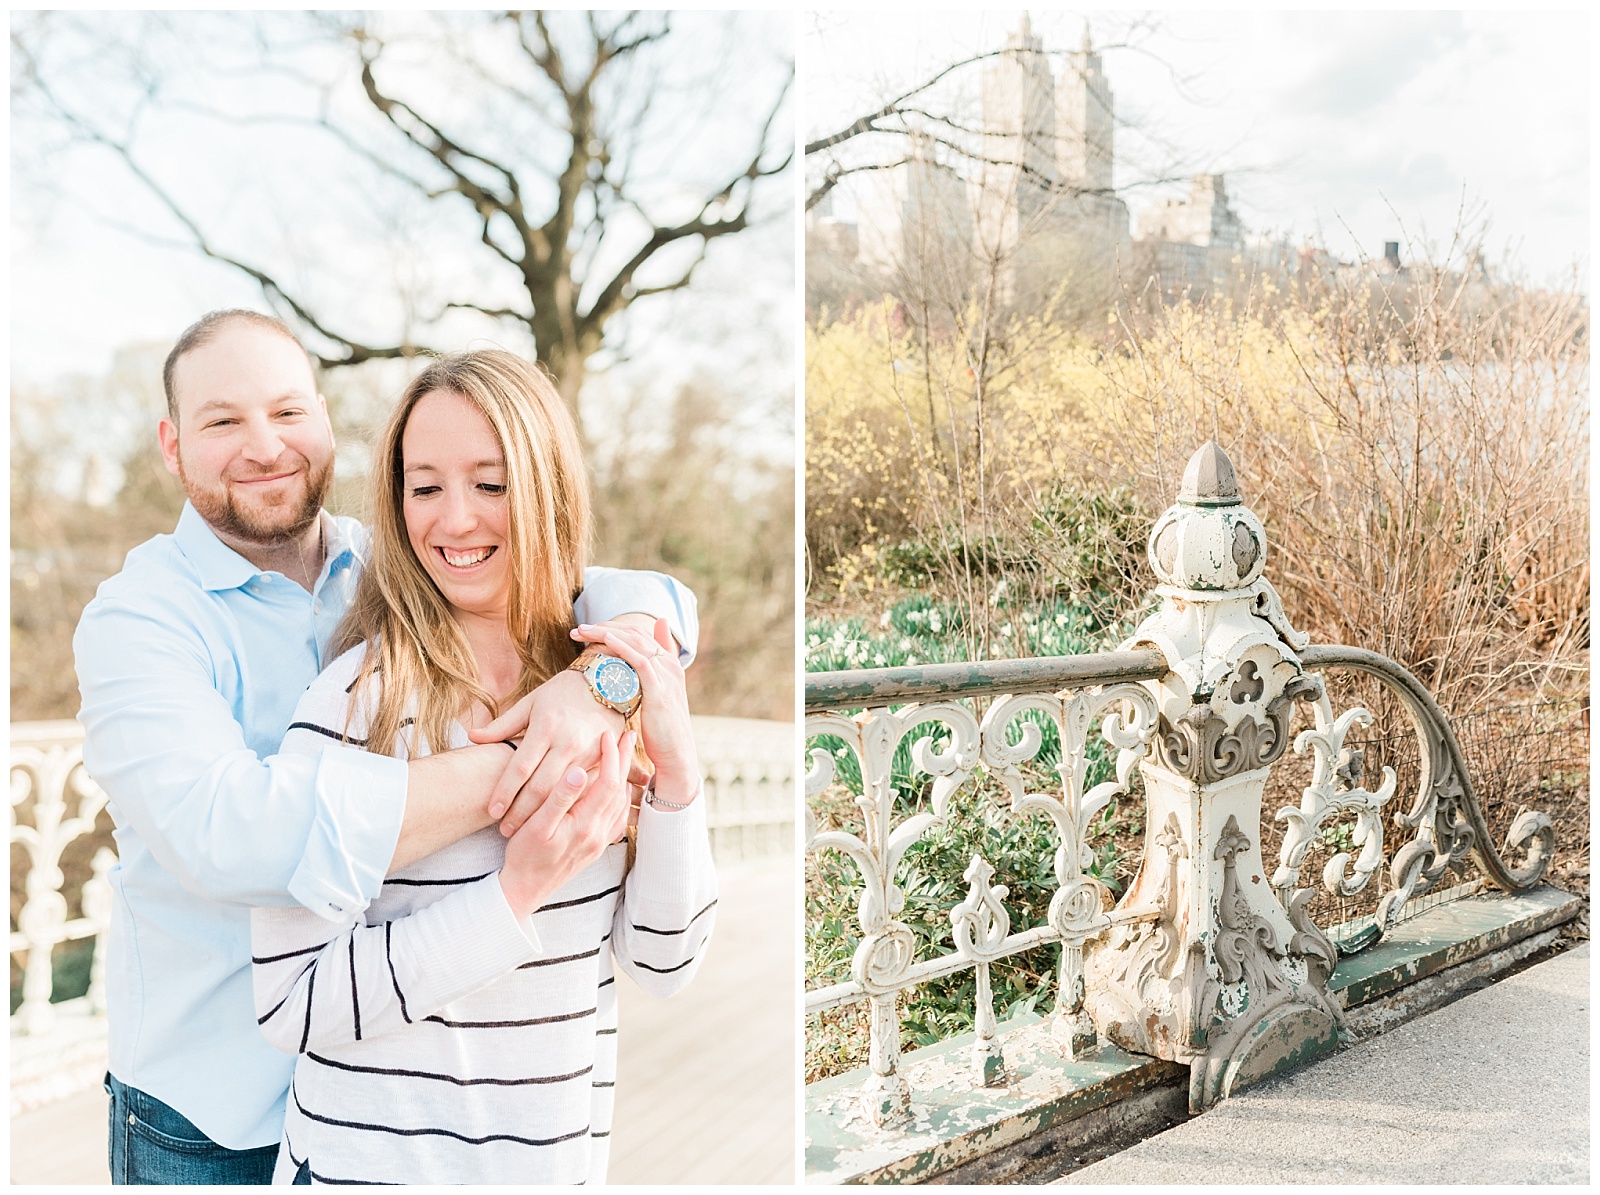 Central Park, NYC engagement session, springtime, wedding photographer, New York, light and airy